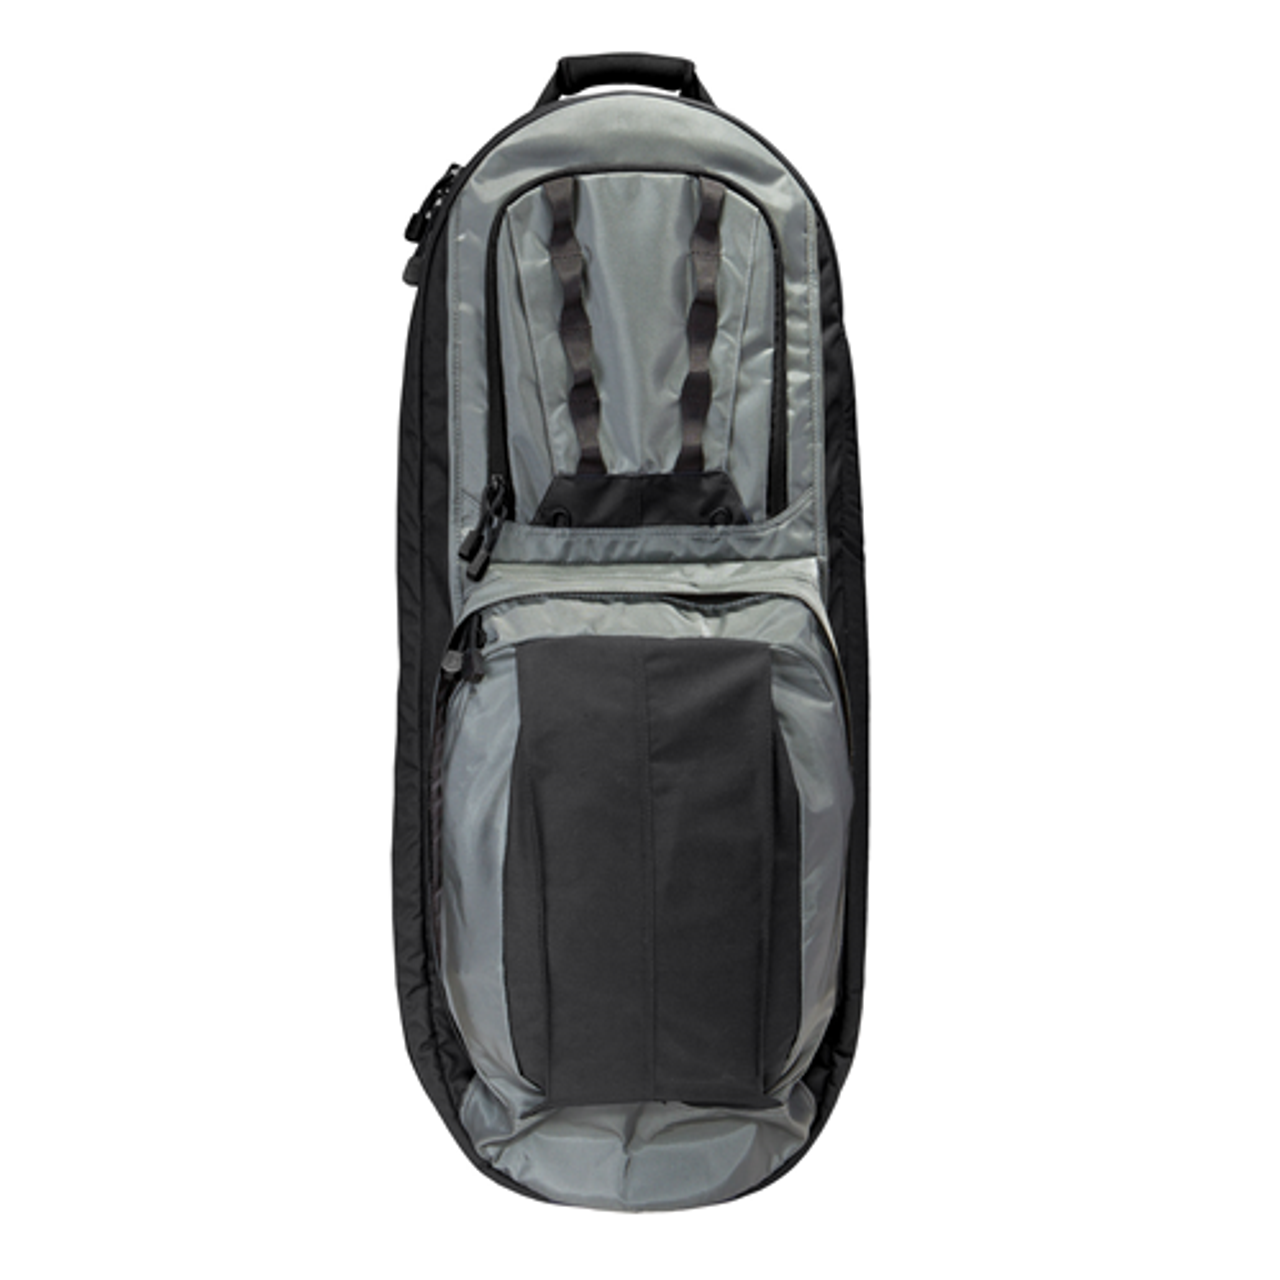 Product Review: 5.11 Tactical COVRT M4 rifle bag